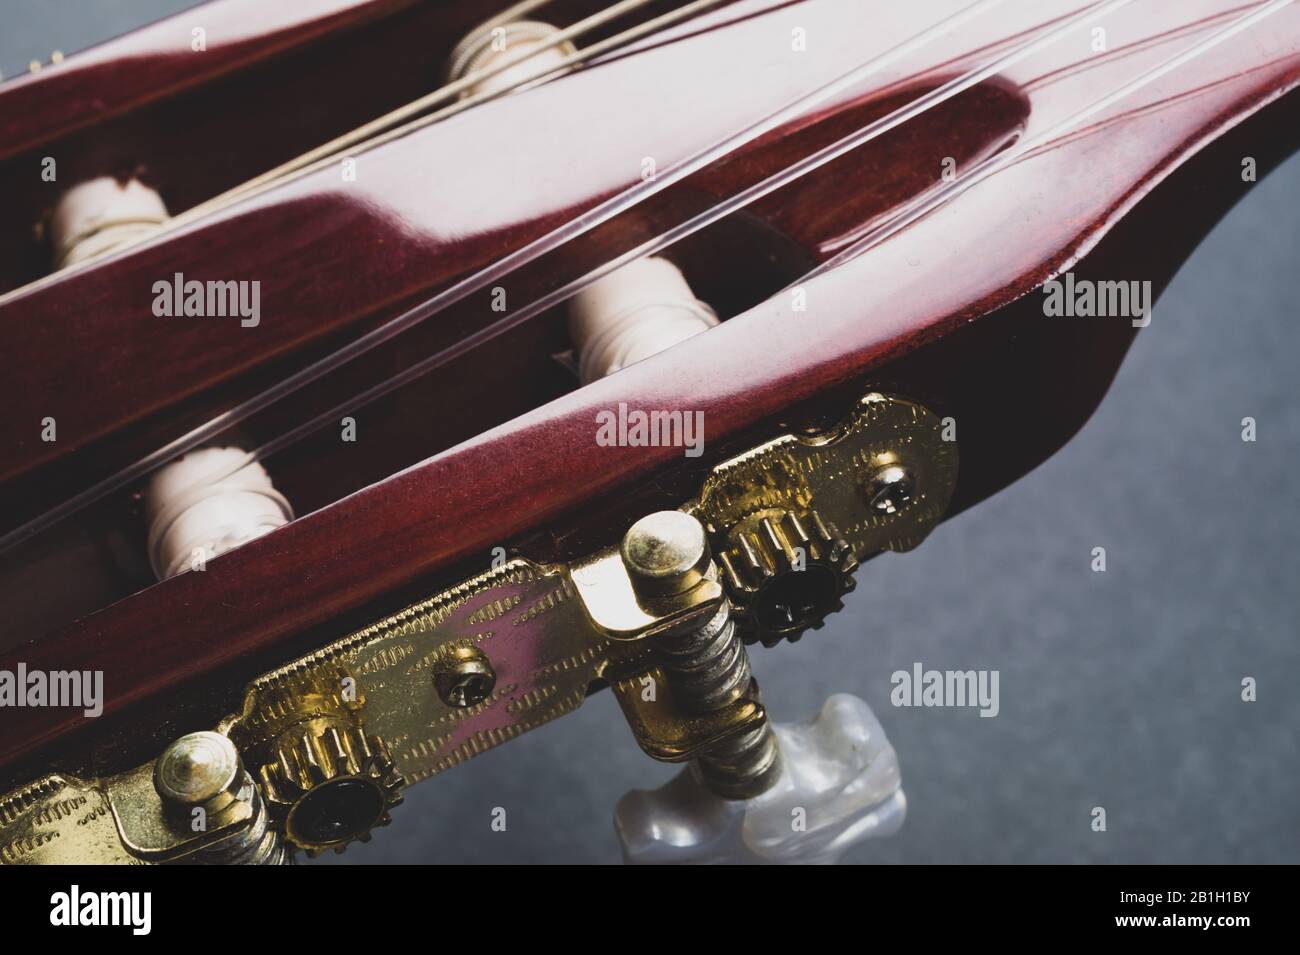 Guitar headstock close up. acoustic musical instrument Stock Photo